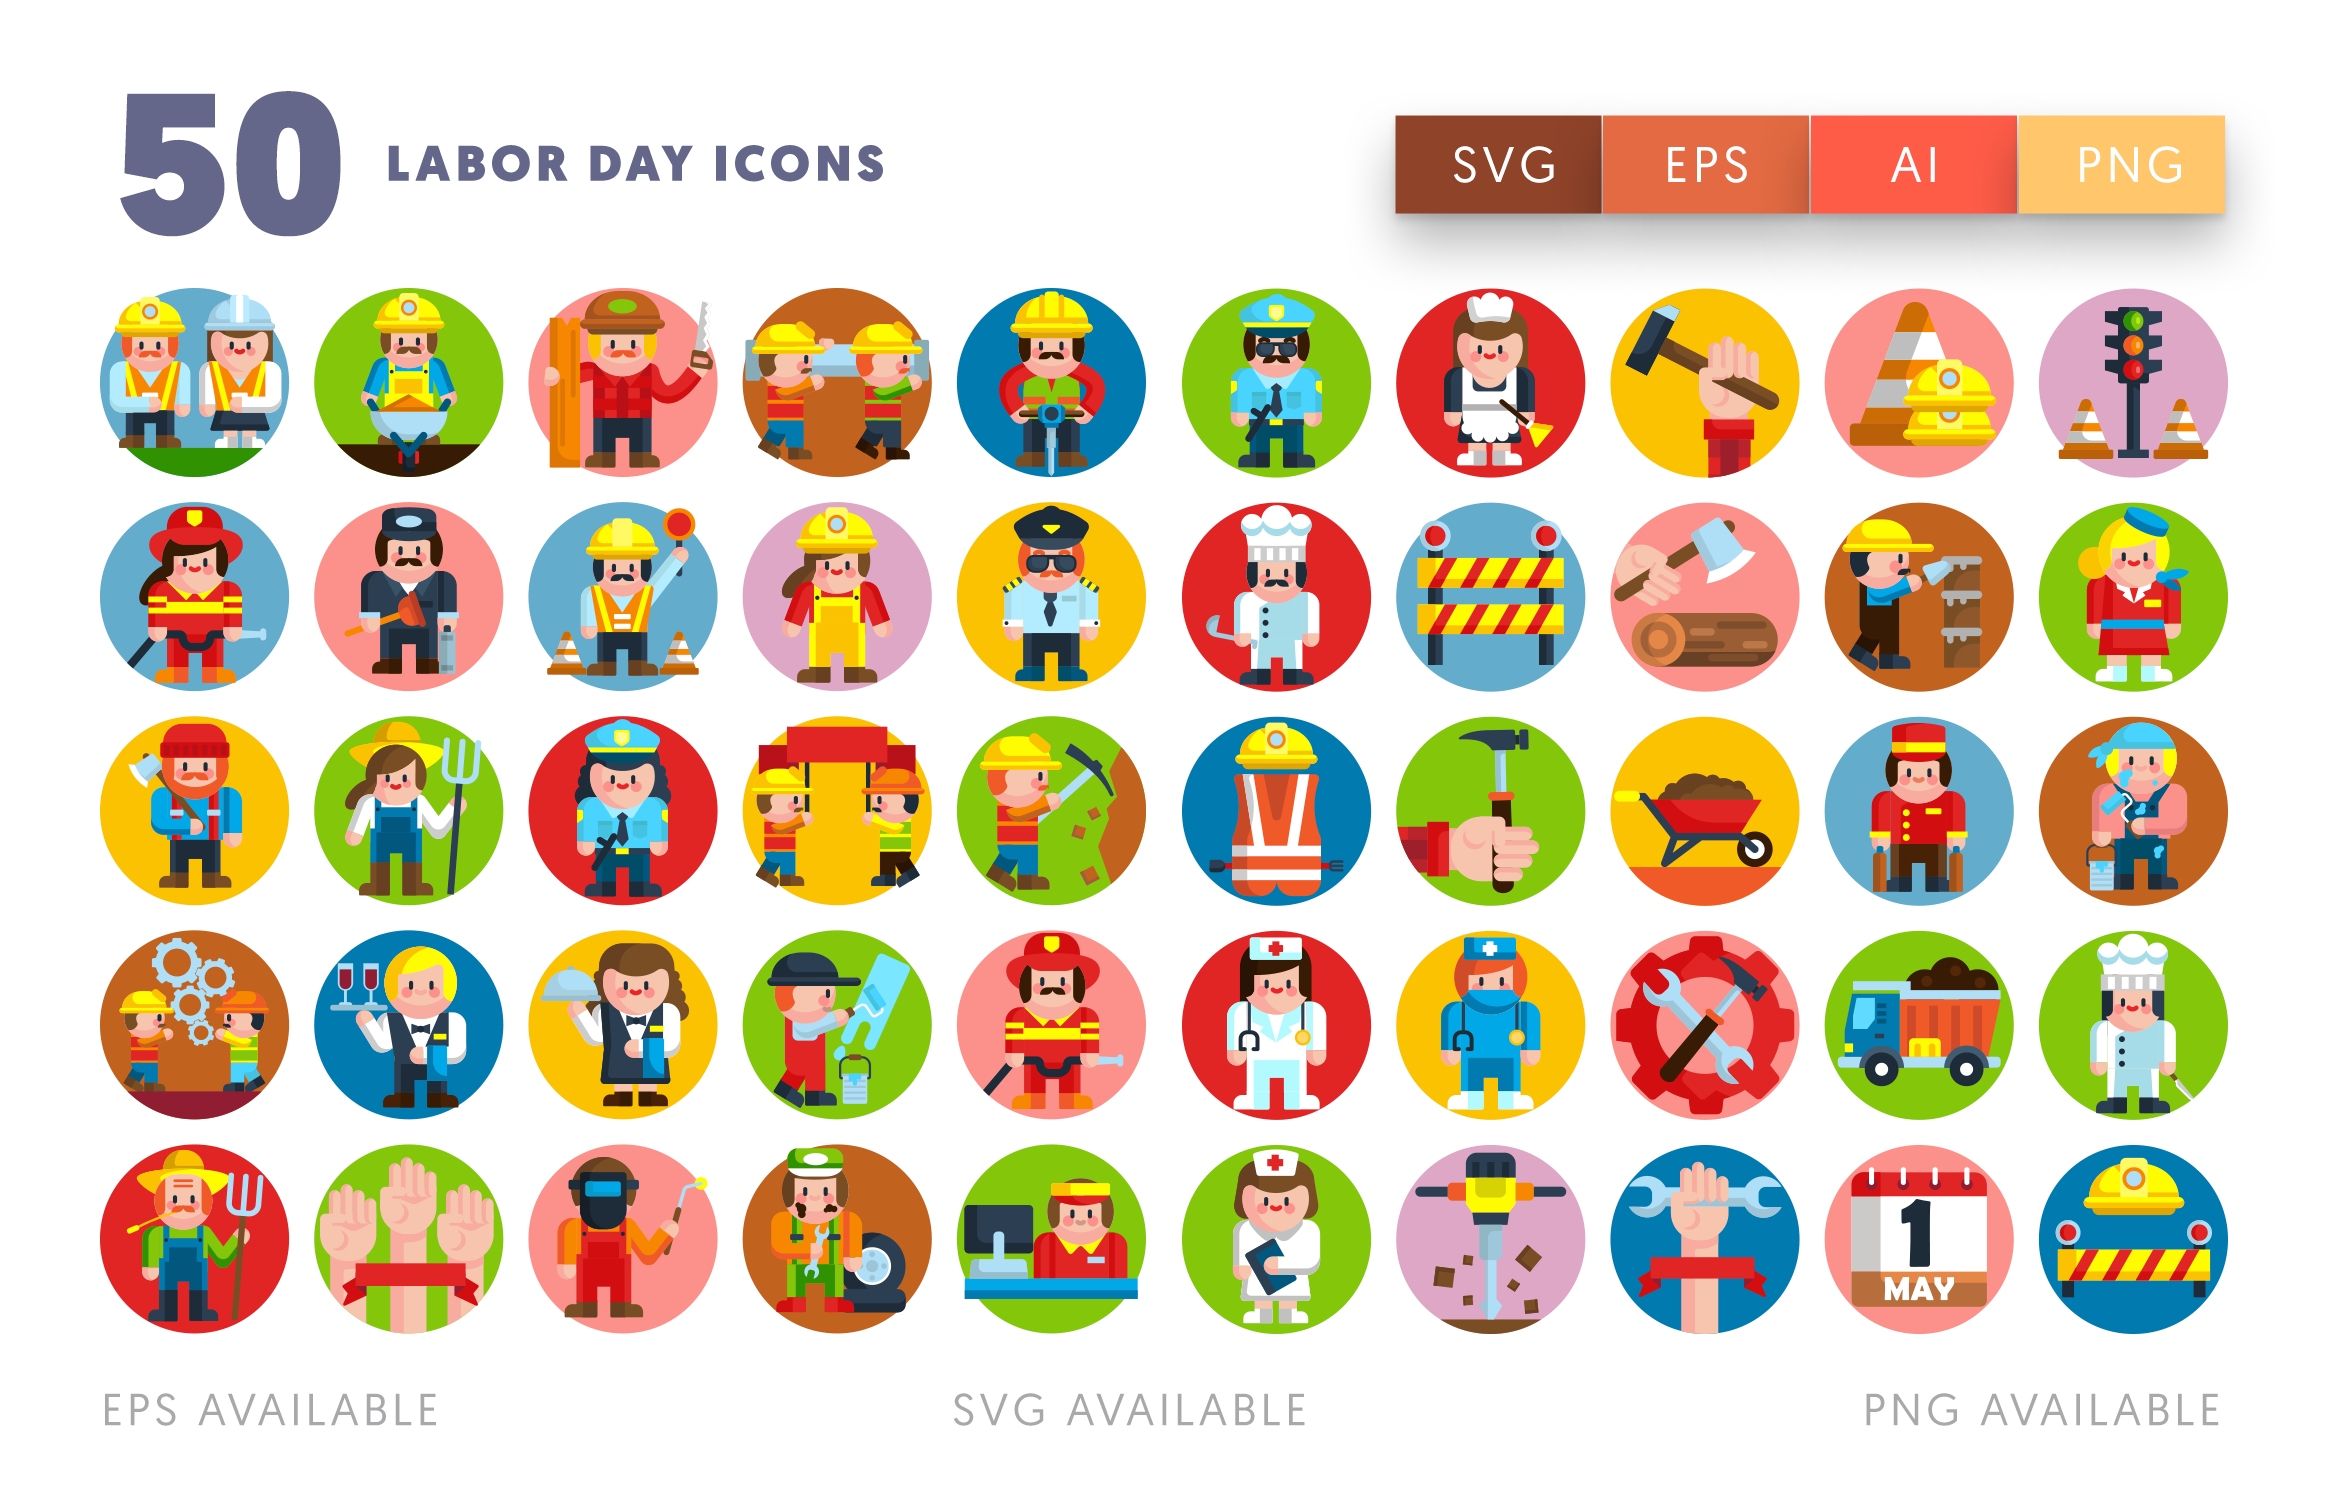 50 Labor Day Icons